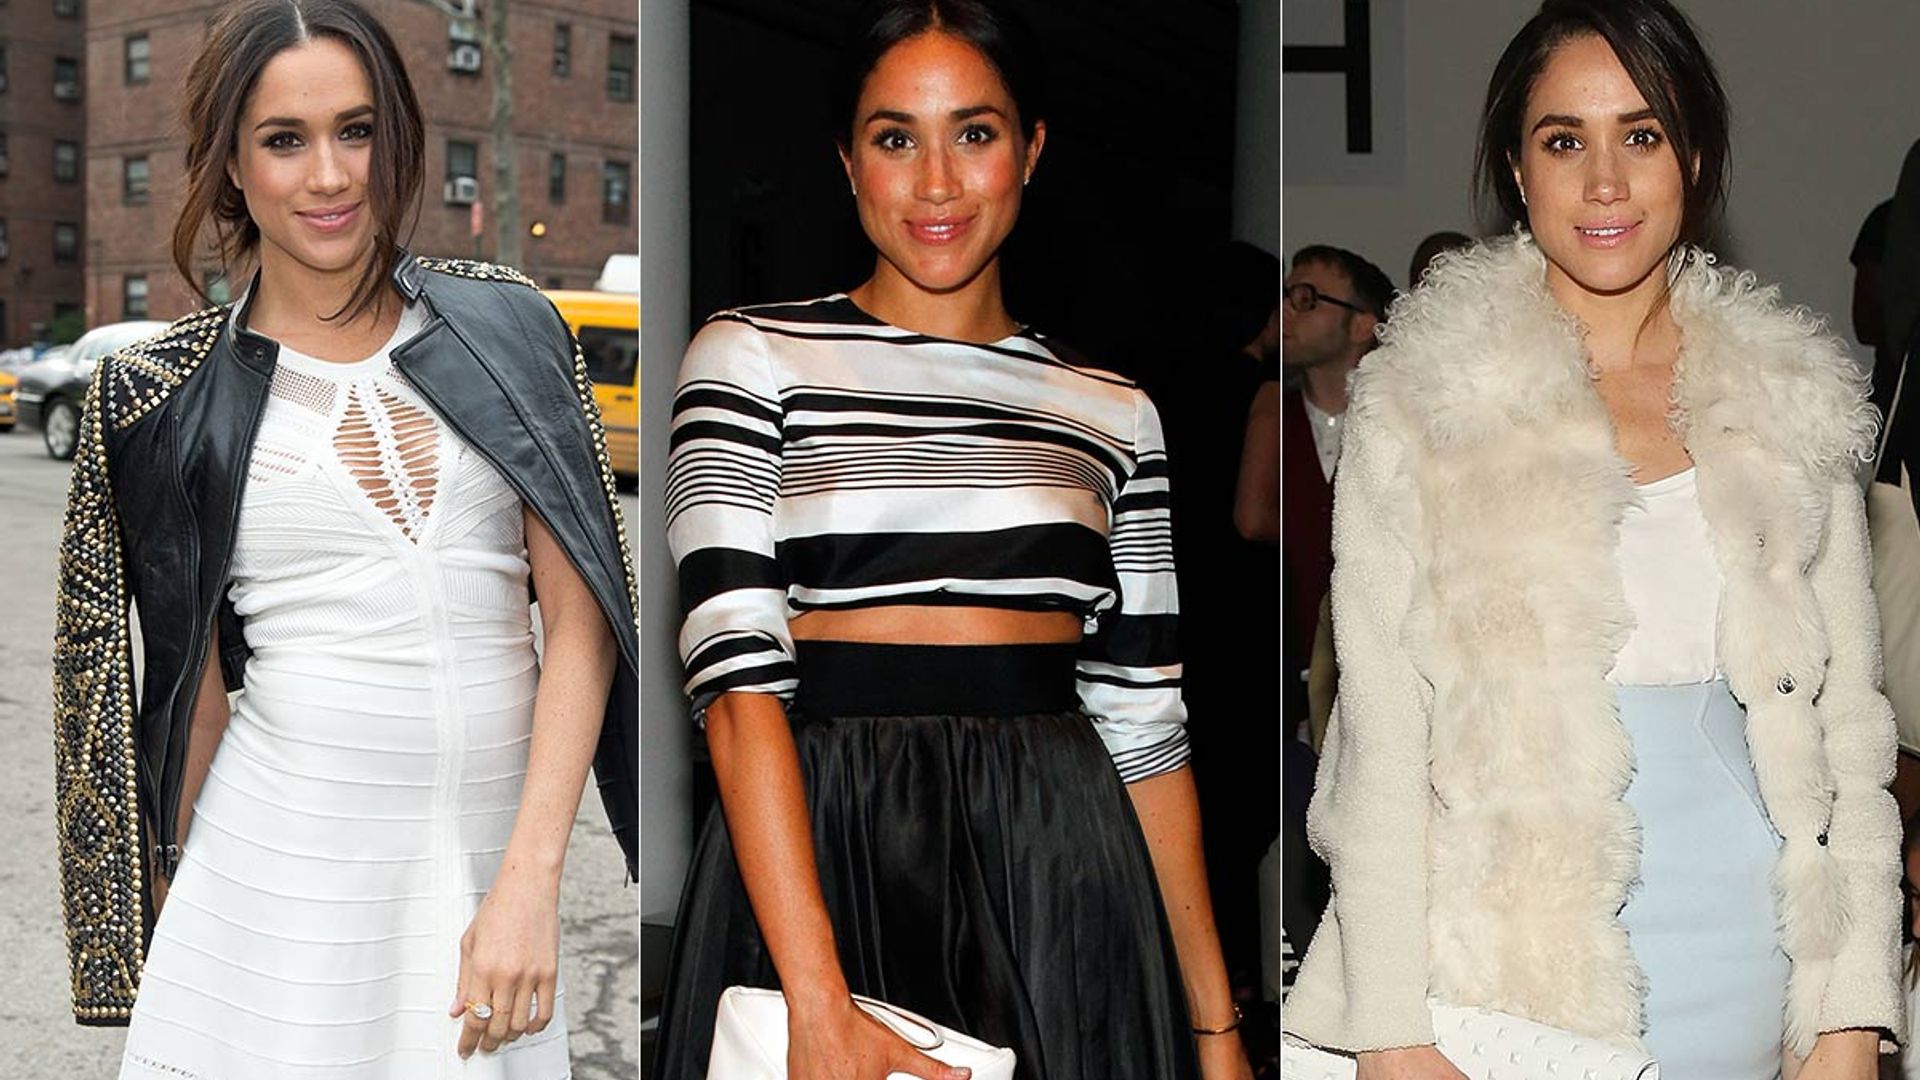 Meghan Markle was a regular at fashion week - see her best outfits